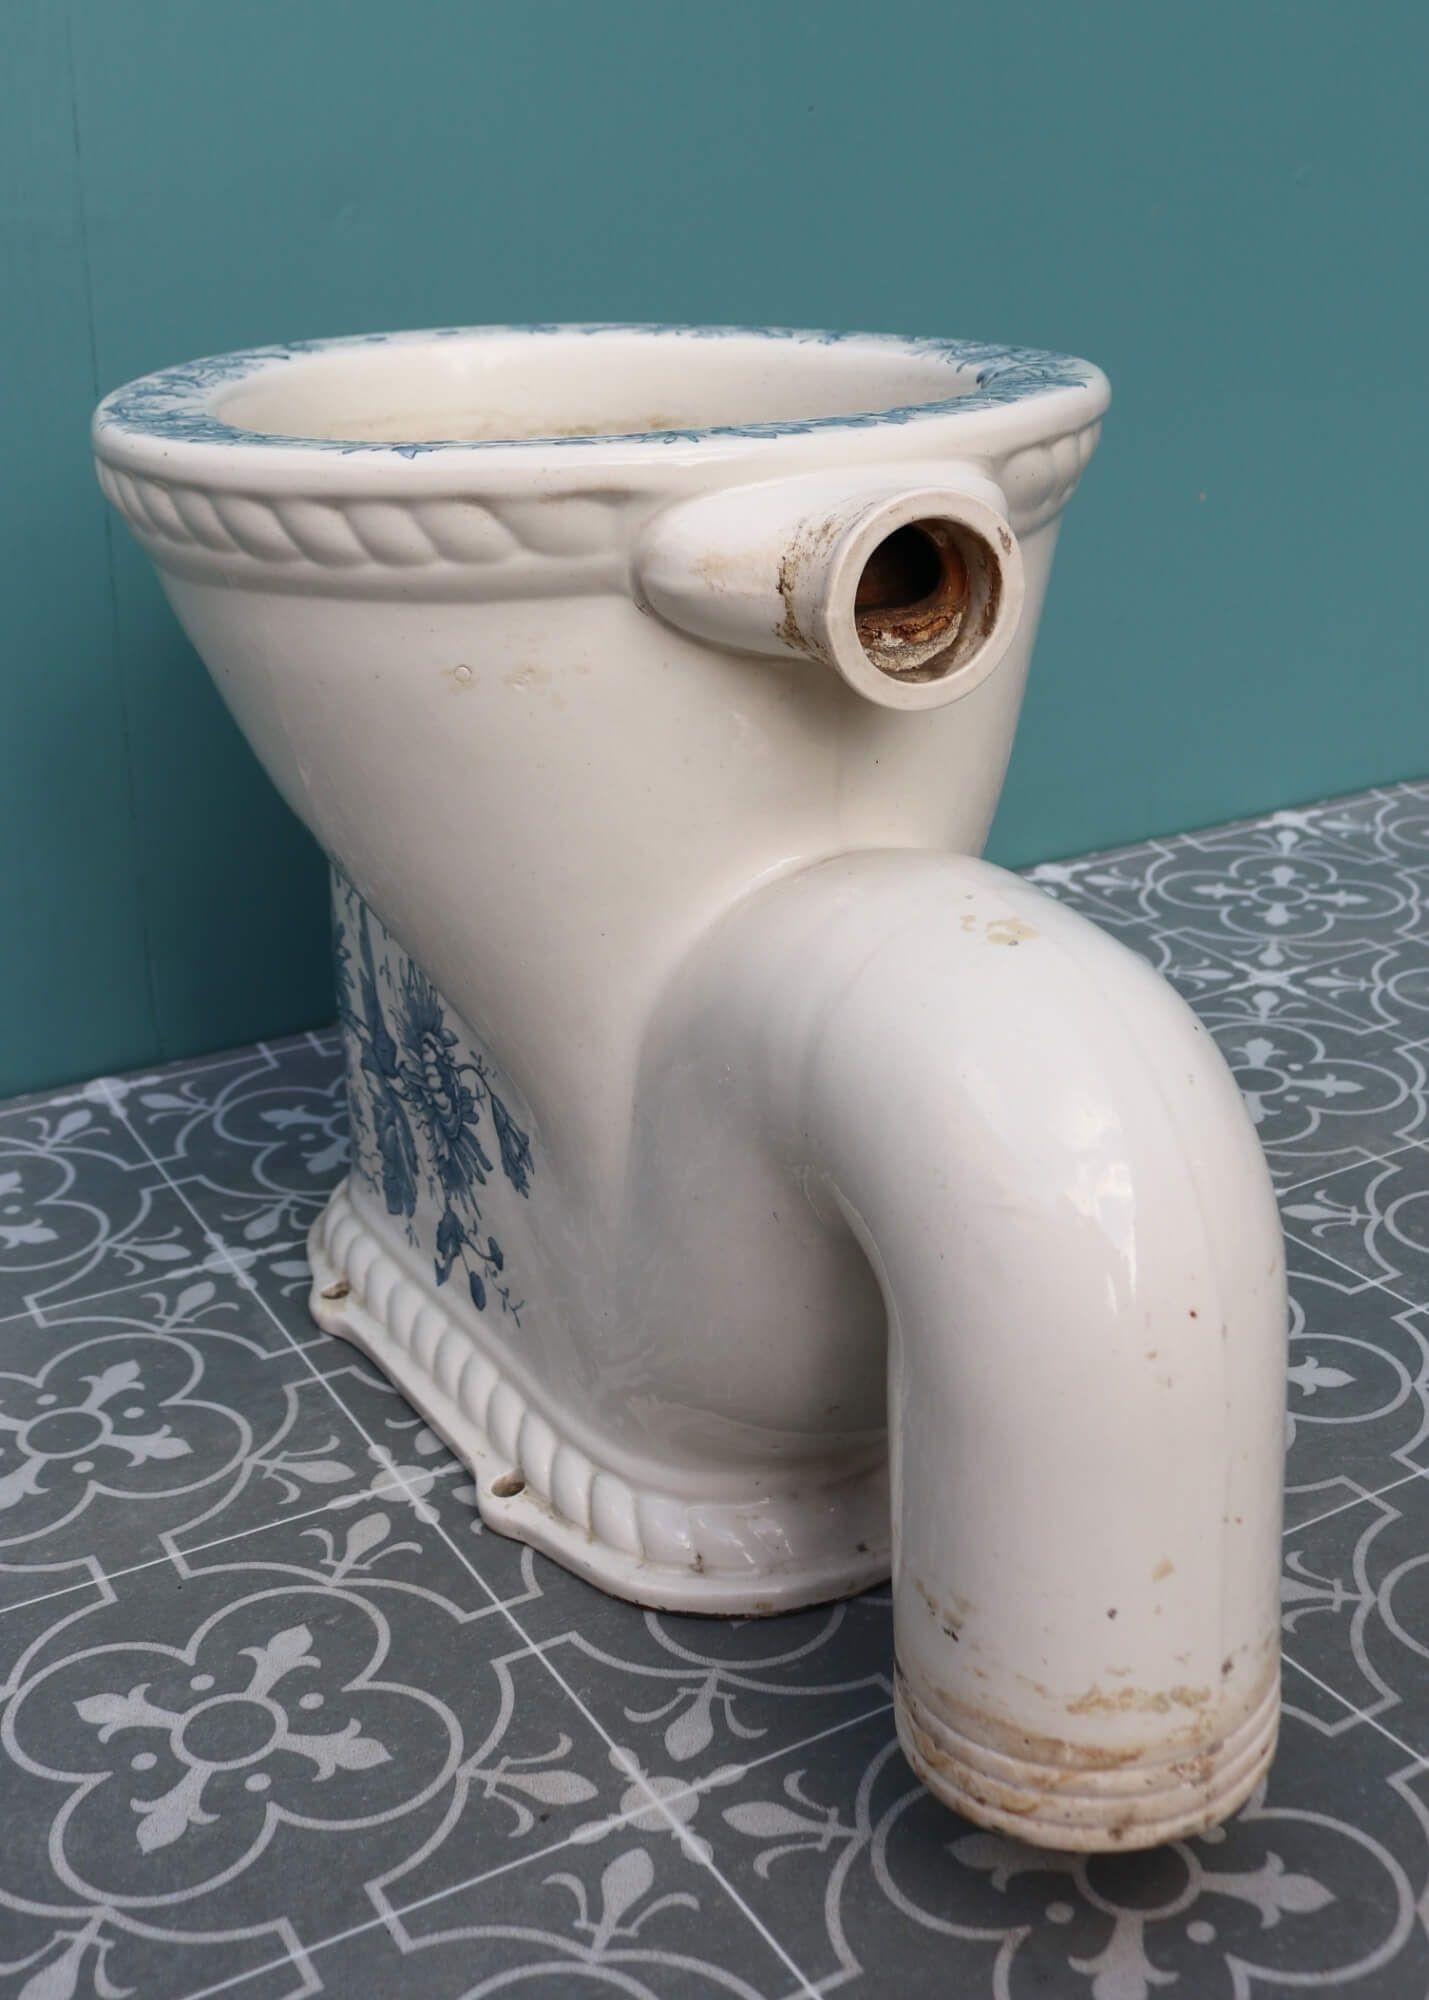 Porcelain Antique Victorian Patterned Waterfall Toilet with S Trap